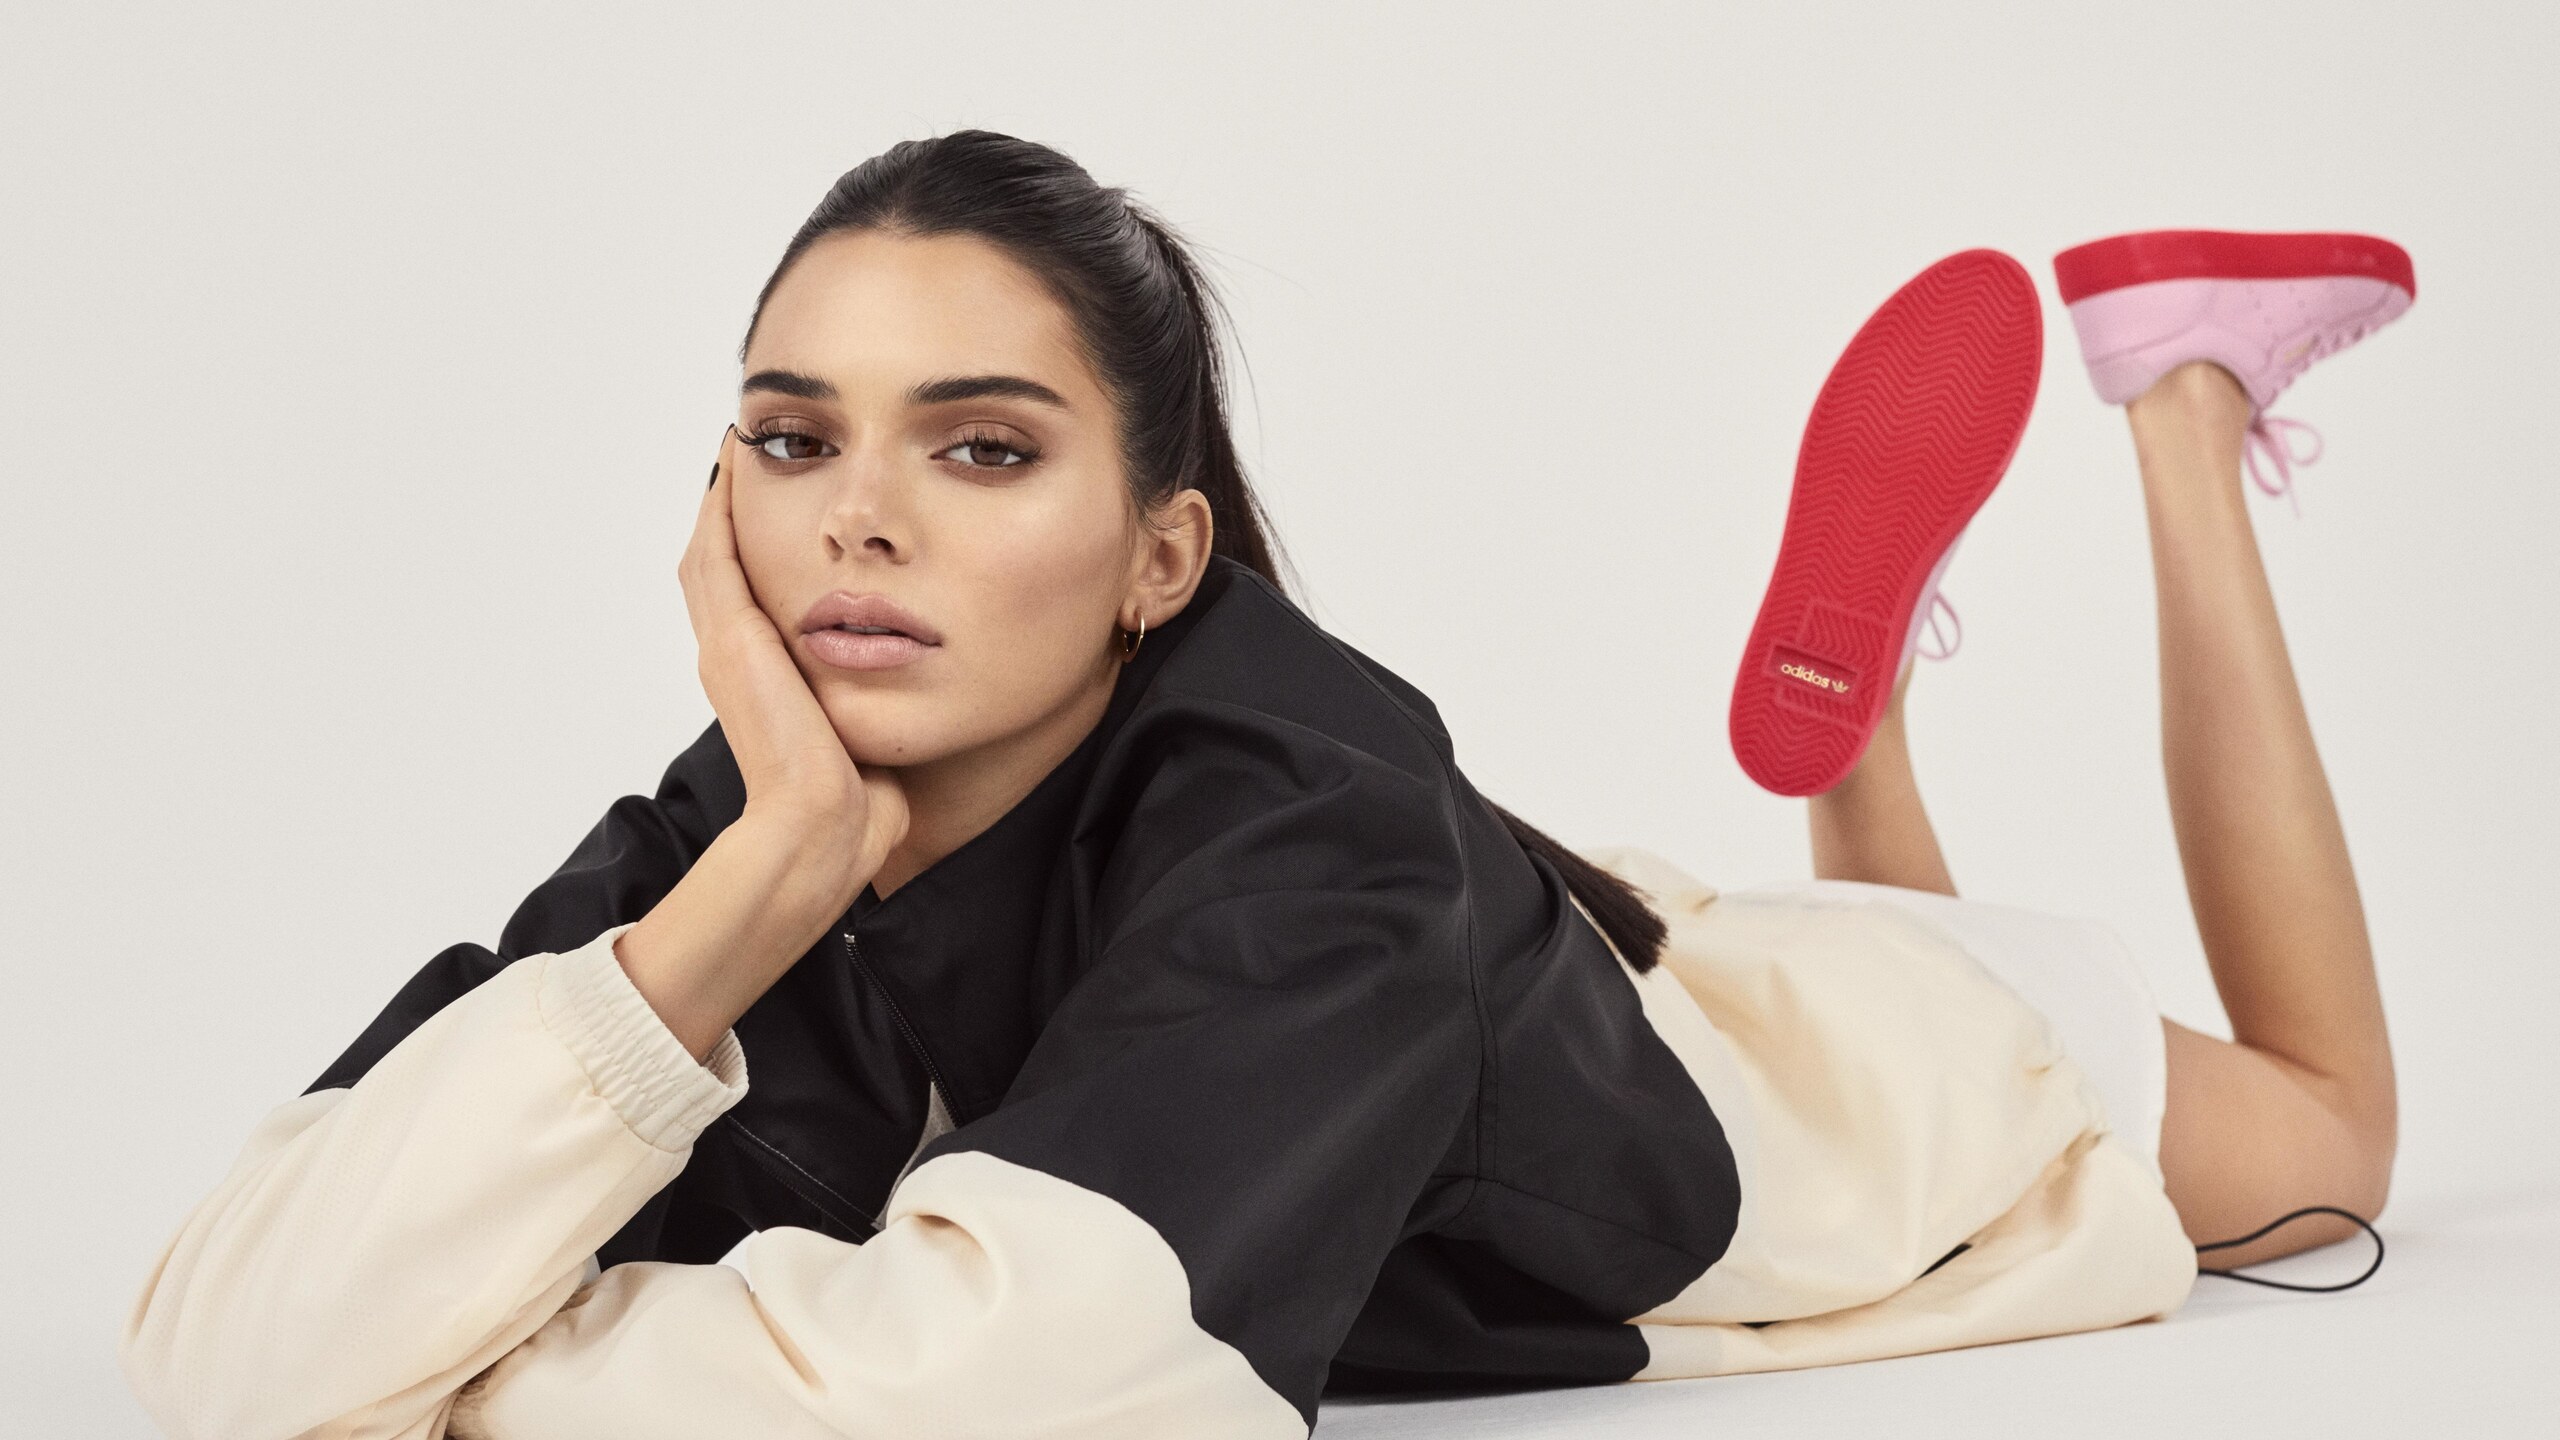 White Background Hand On Face Lying Down Open Mouth Kendall Jenner Women Model Looking At Viewer Dar 2560x1440